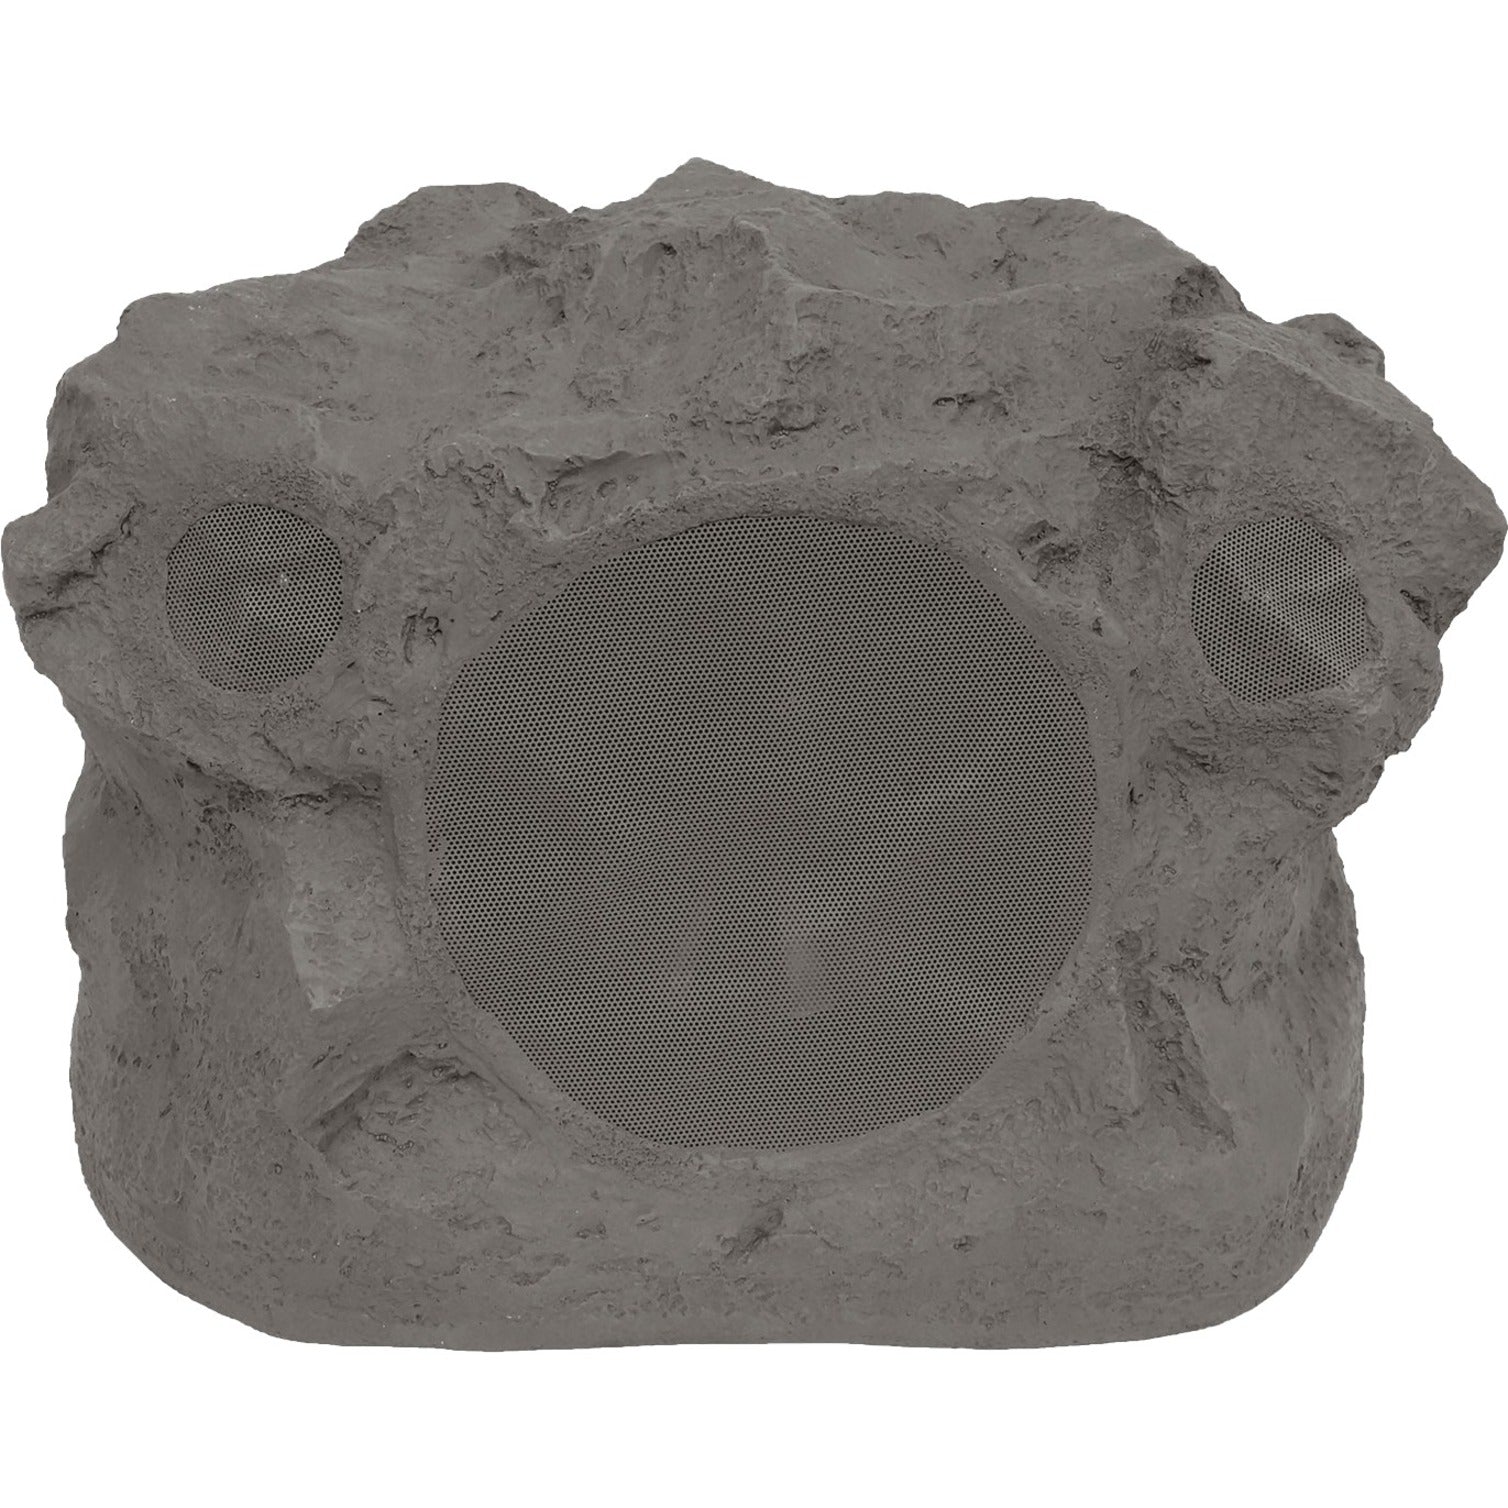 Proficient Audio PAS-RS8SI-GRANITE Protege RS8Si 8" DVC/SST Outdoor Rock Speaker - Granite, 10 Year Limited Warranty, Living Room Application